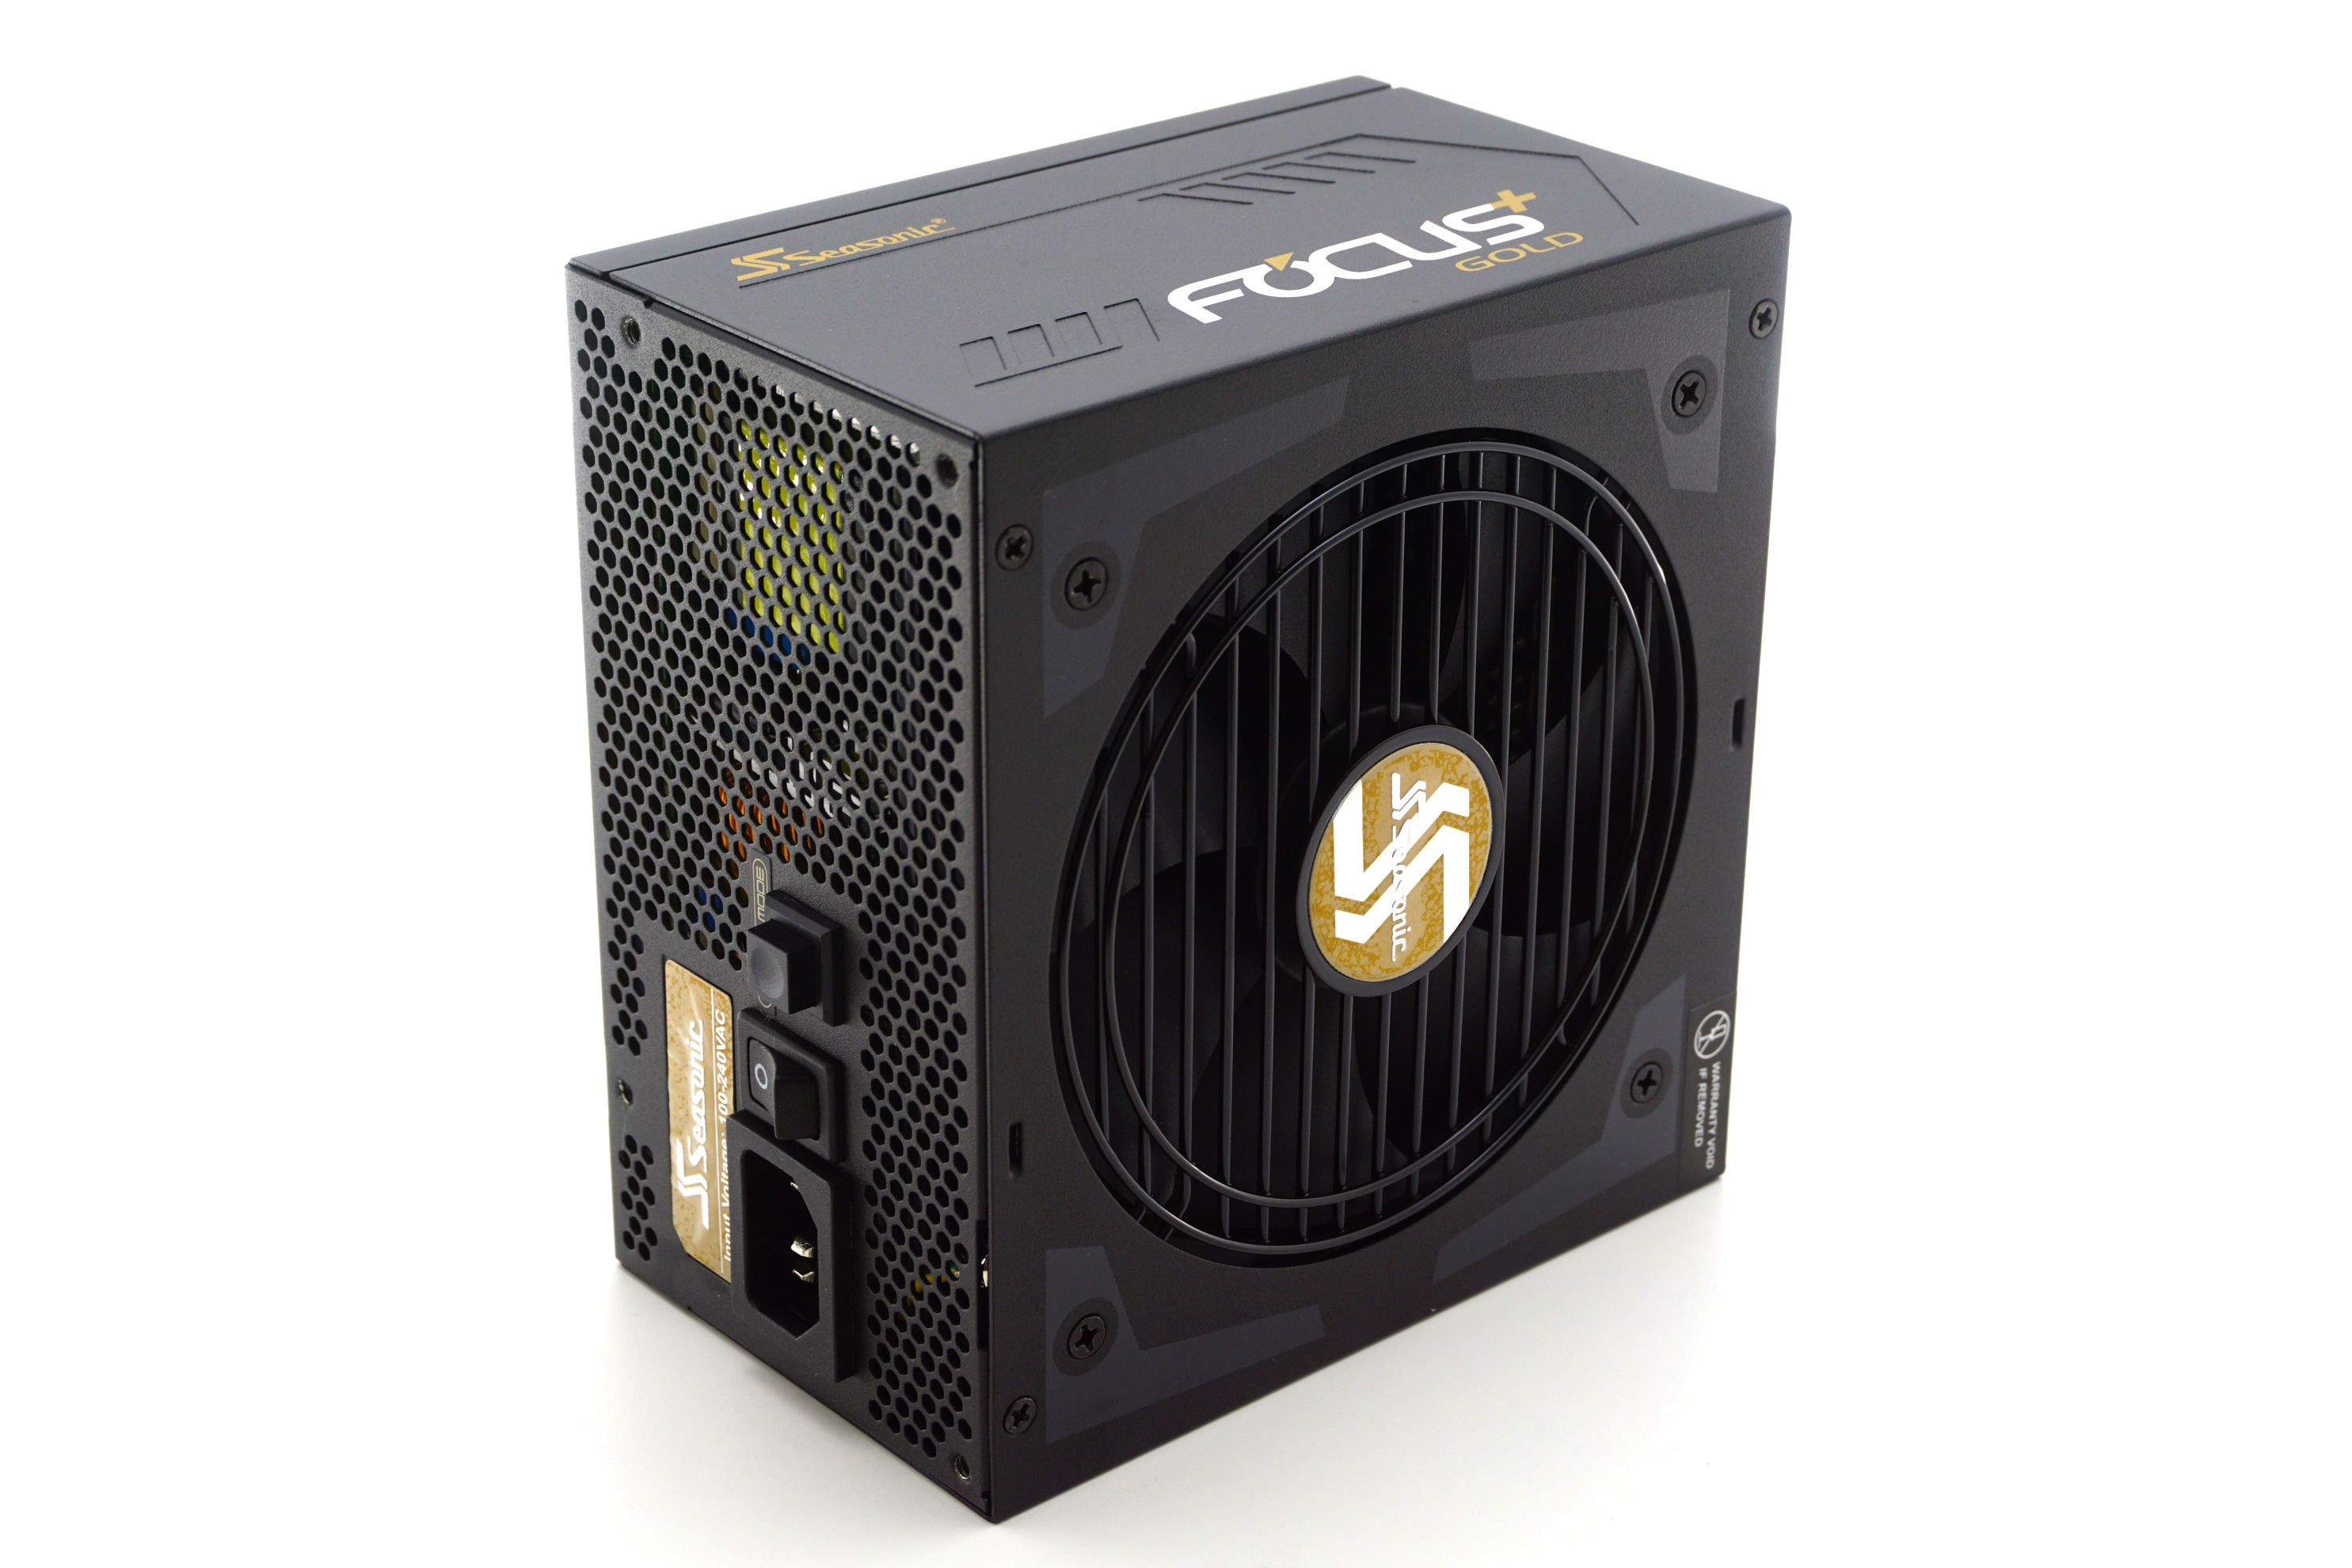 Final Words & Conclusion - The Seasonic Focus Plus Gold 750FX 750W PSU  Review: SeaSonic Quality at Mainstream Prices